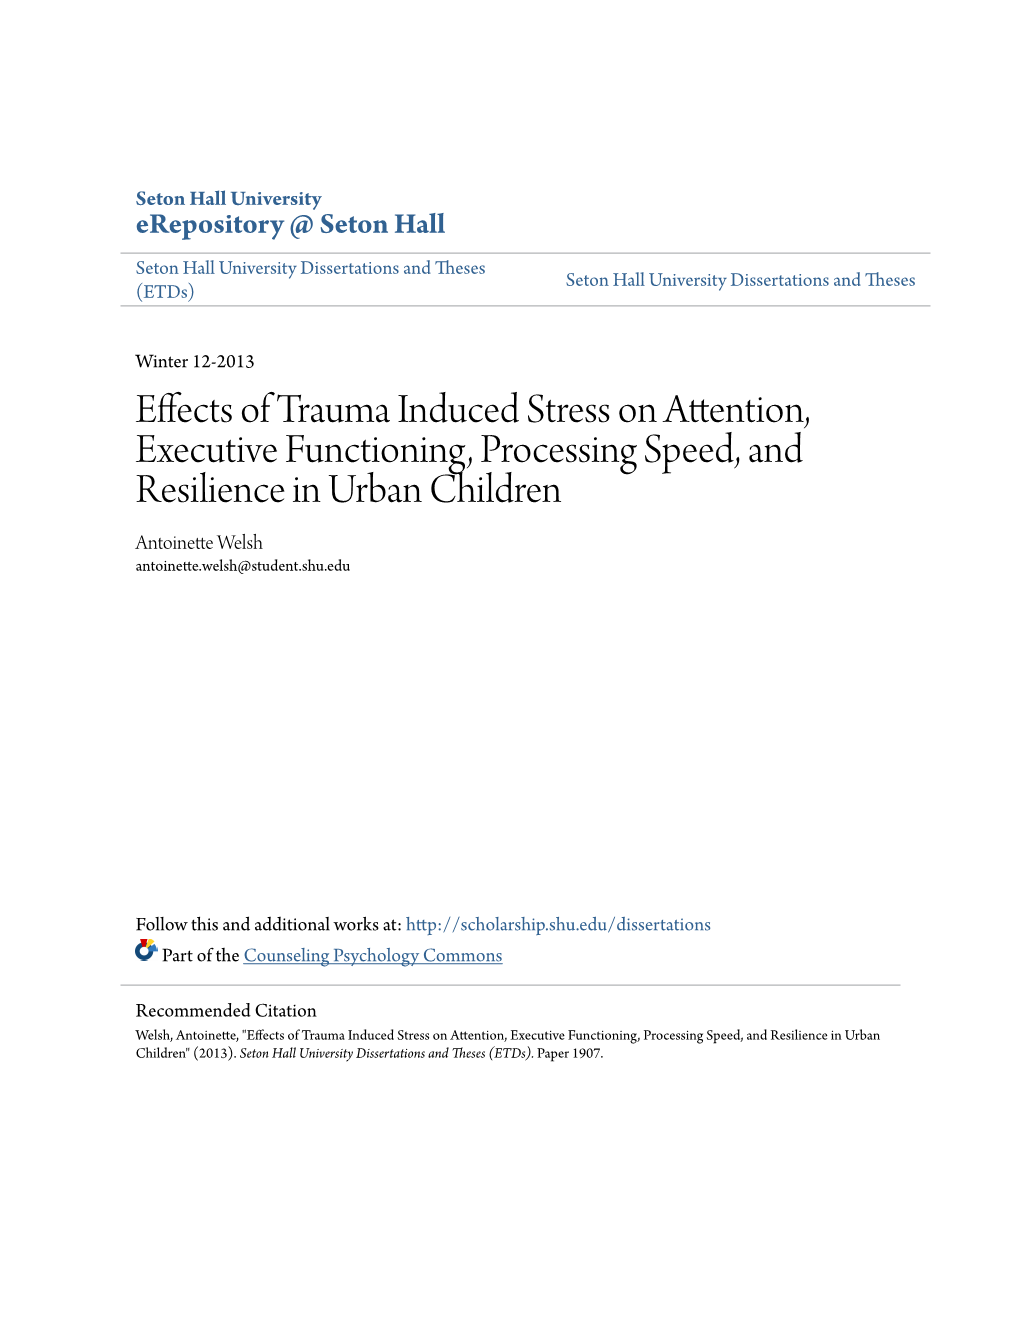 Effects of Trauma Induced Stress on Attention, Executive Functioning